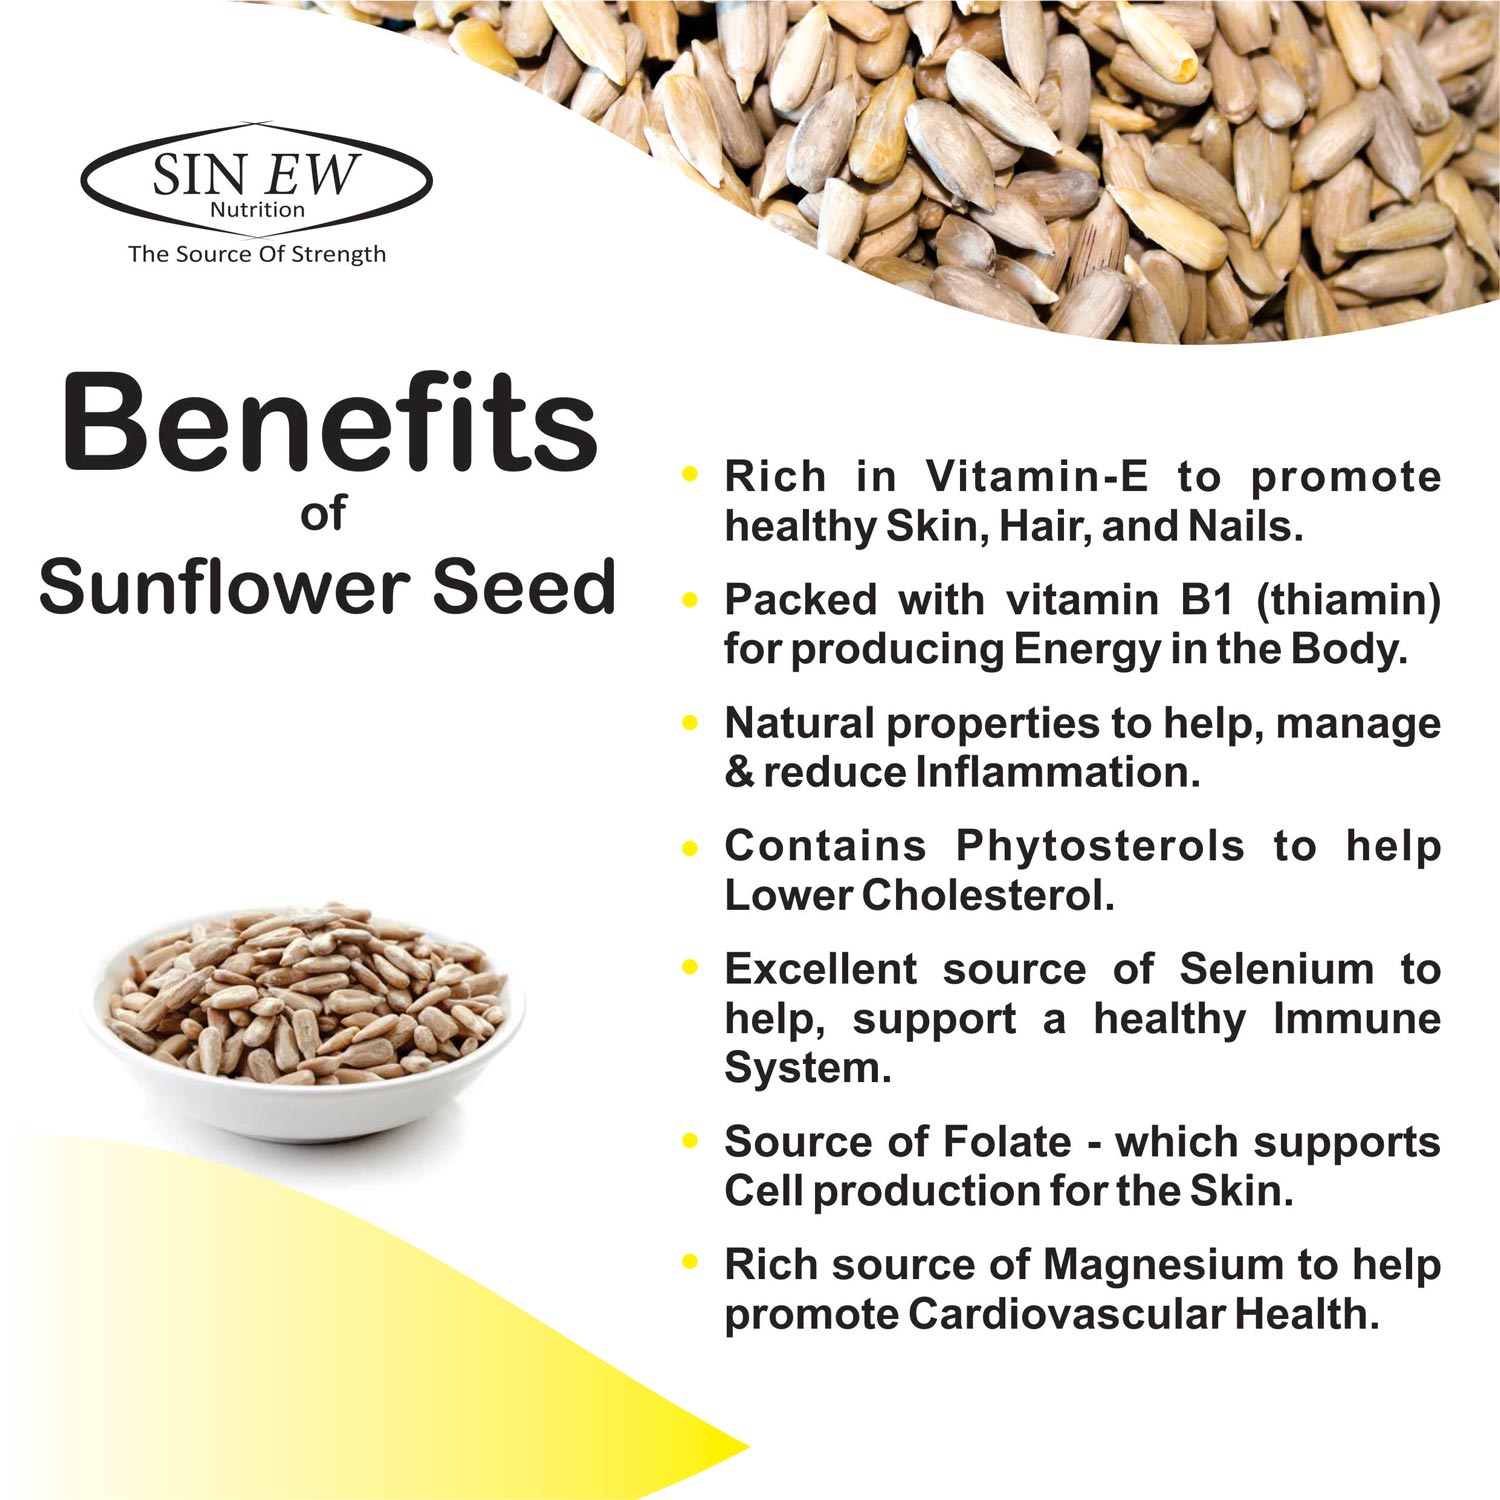 Buy Sinew Sunflower Seeds 800gm Online in India 